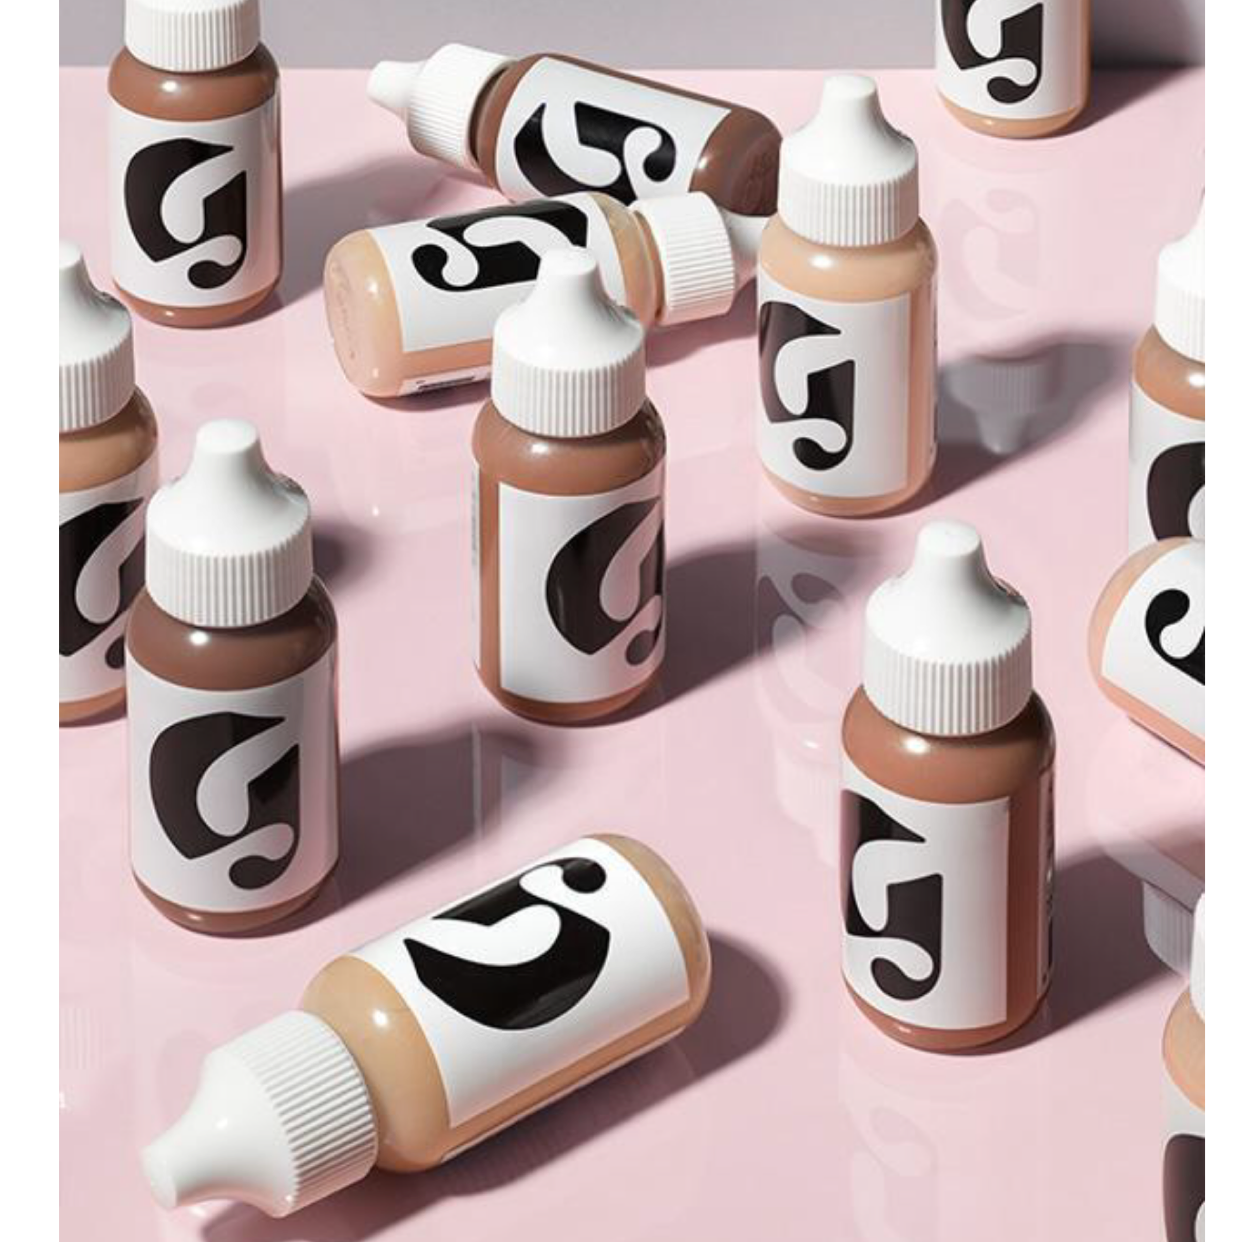 Glossier Perfecting Skin Tint in Light